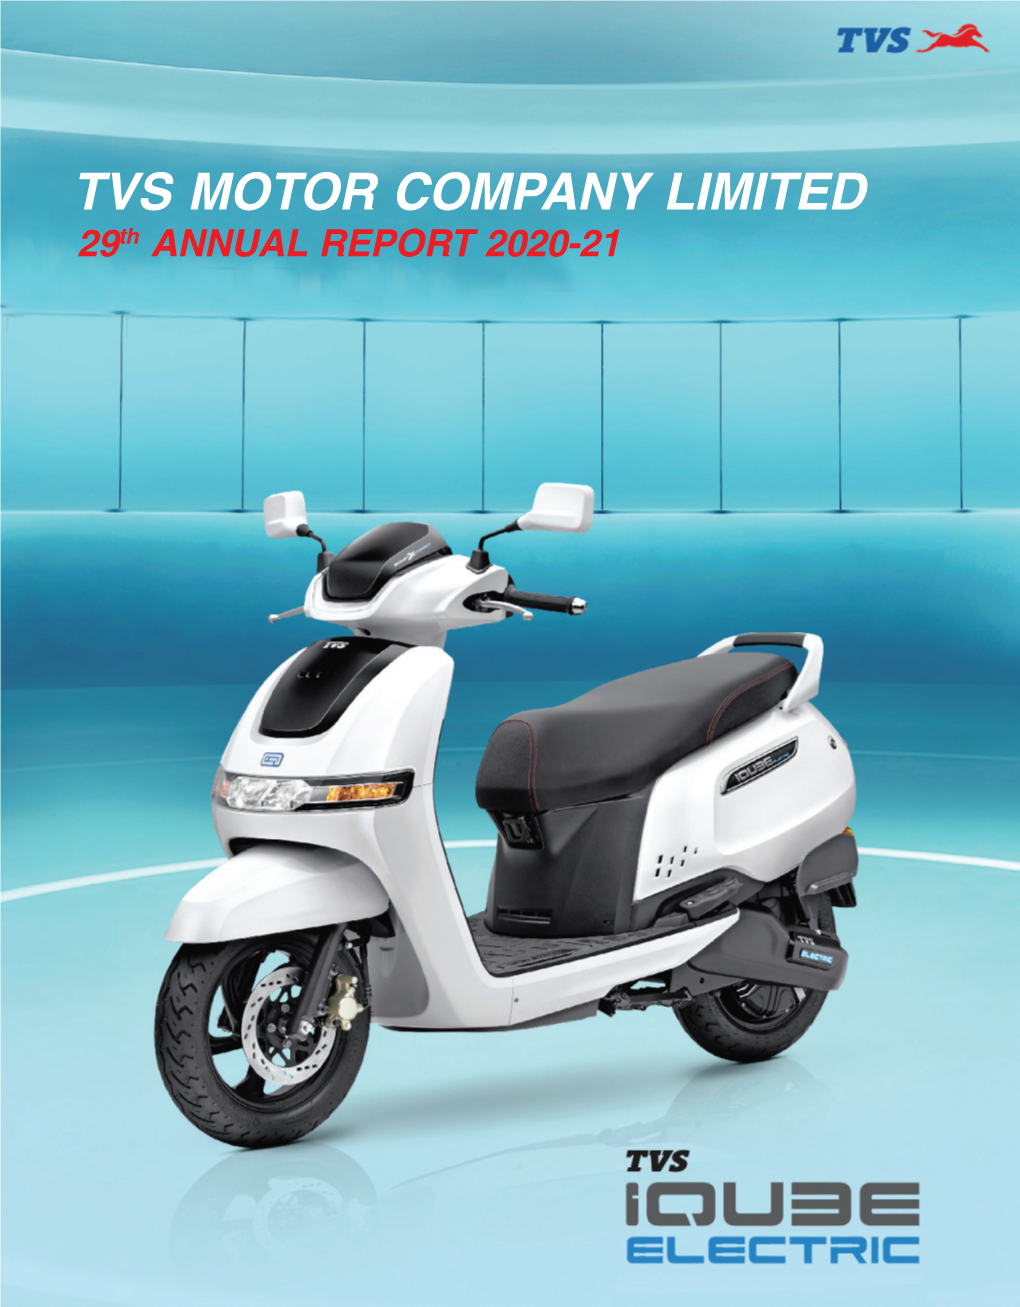 TVS MOTOR COMPANY LIMITED 29Th ANNUAL REPORT 2020-21